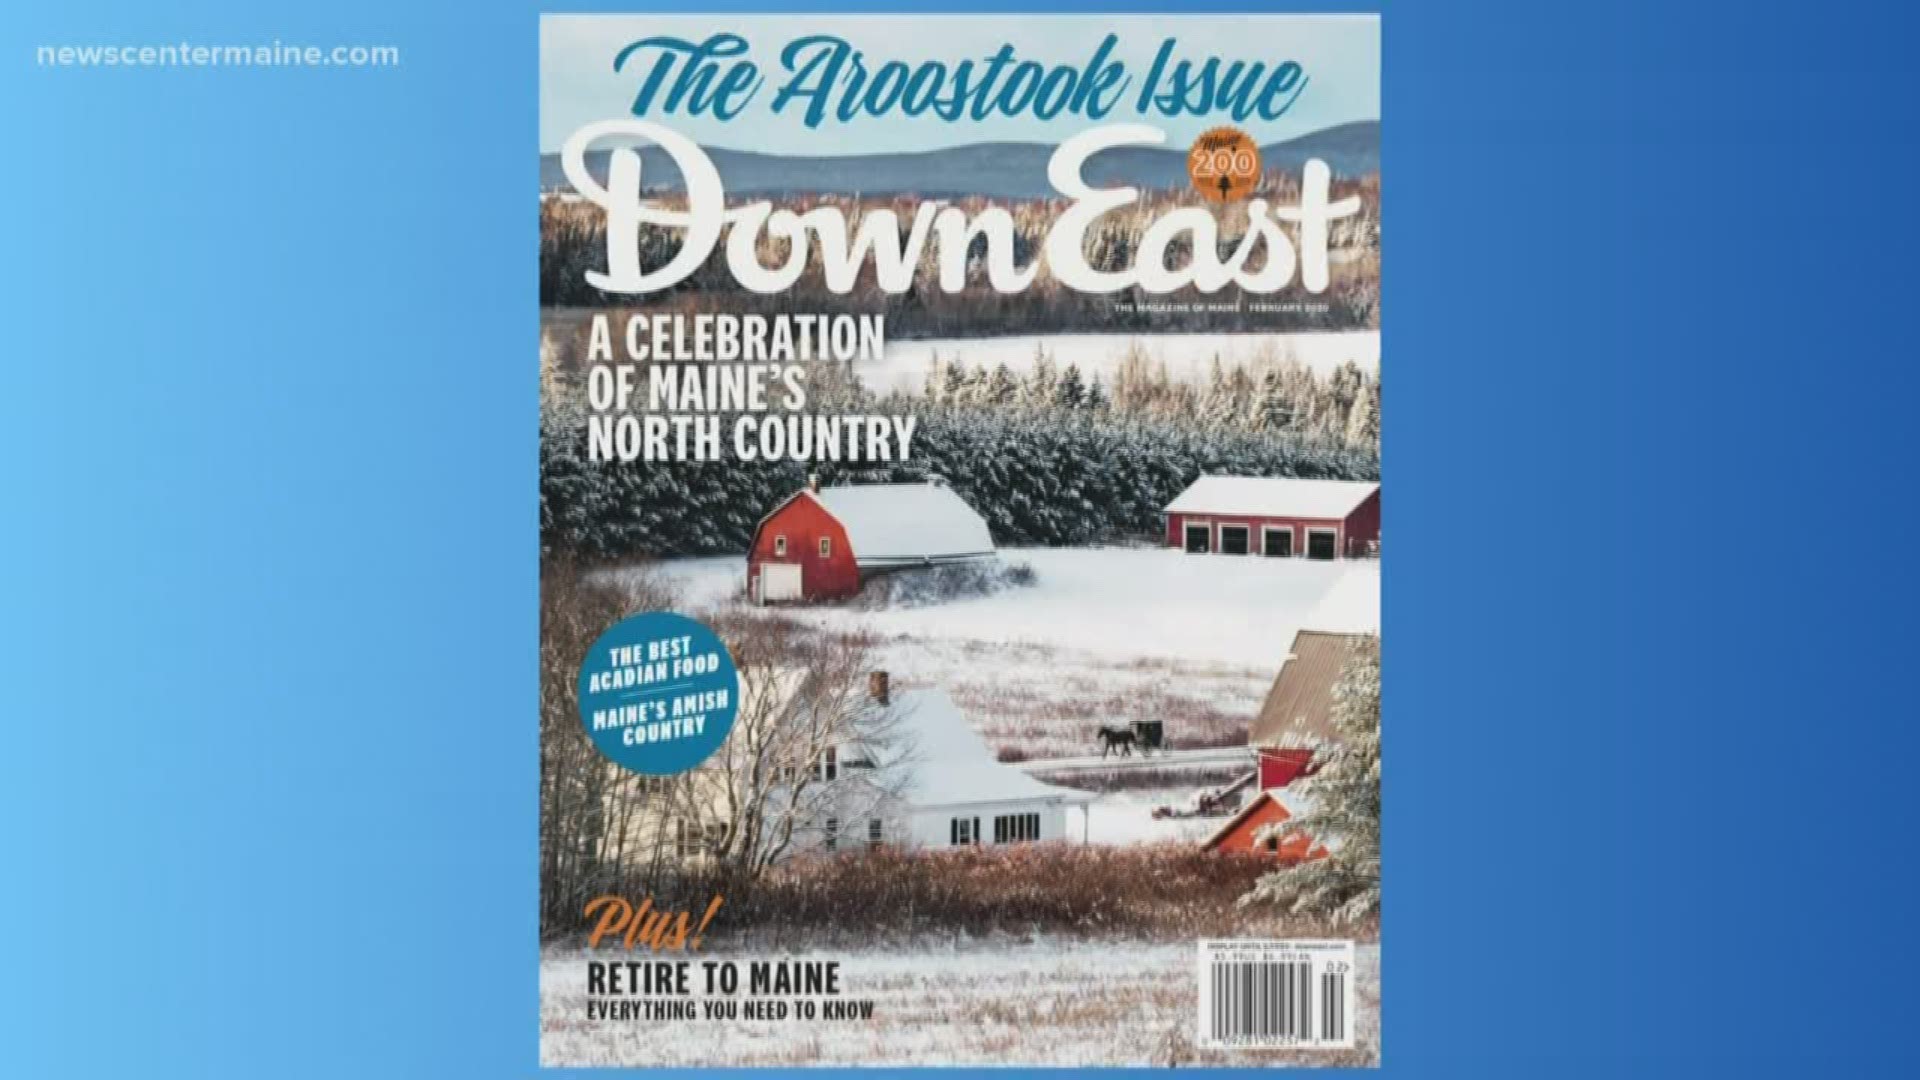 The February issue explores ice fishing, snowmobiling, lodging and where to eat when heading north.